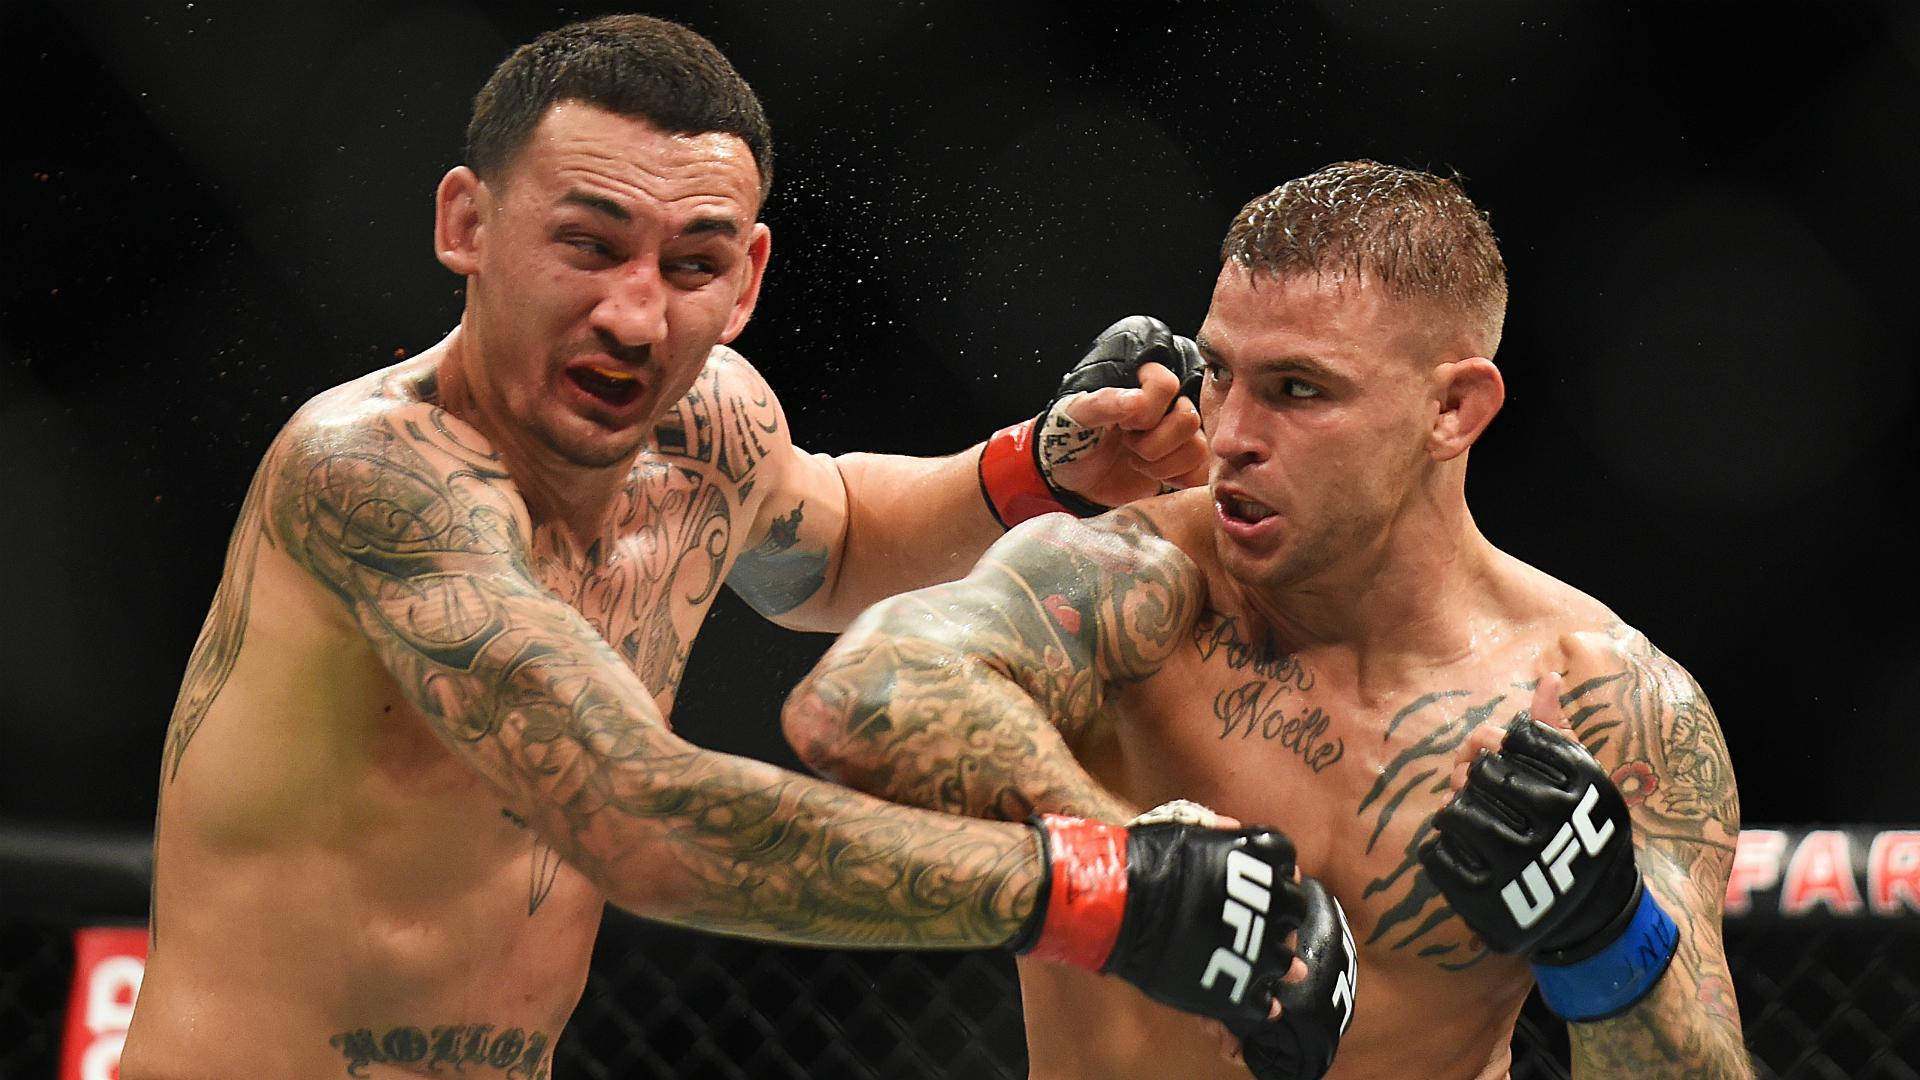 Dustin Poirier Being Punched Wallpaper